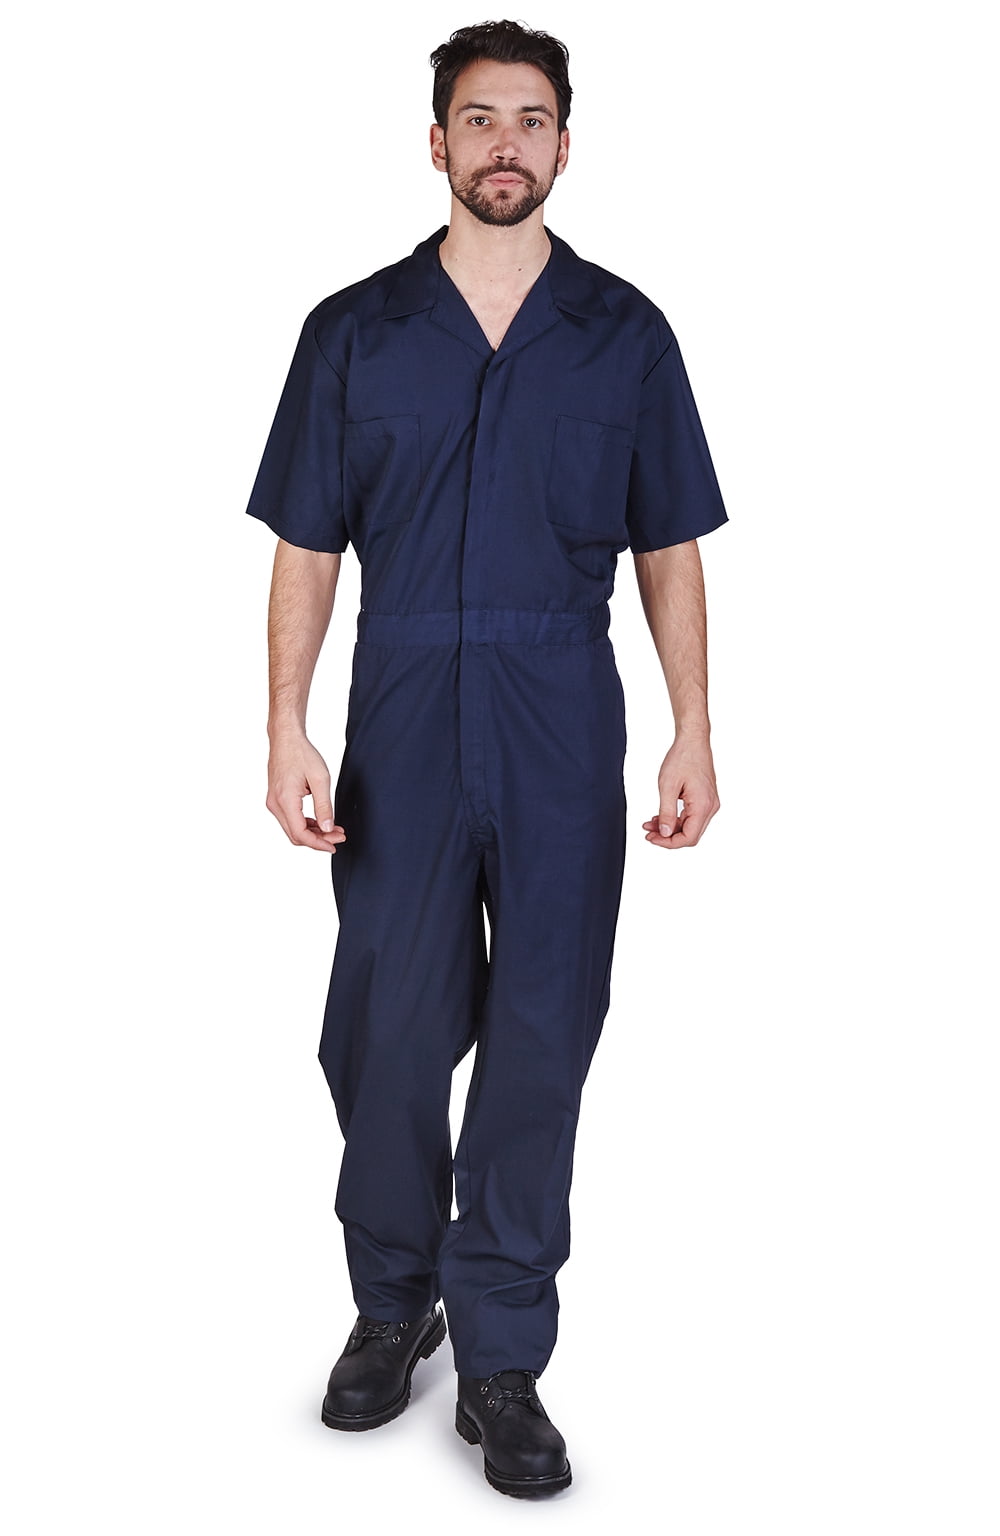 Men's Perfection Uniforms Blue Reflective Coveralls with pockets NWT Size 4XLT 